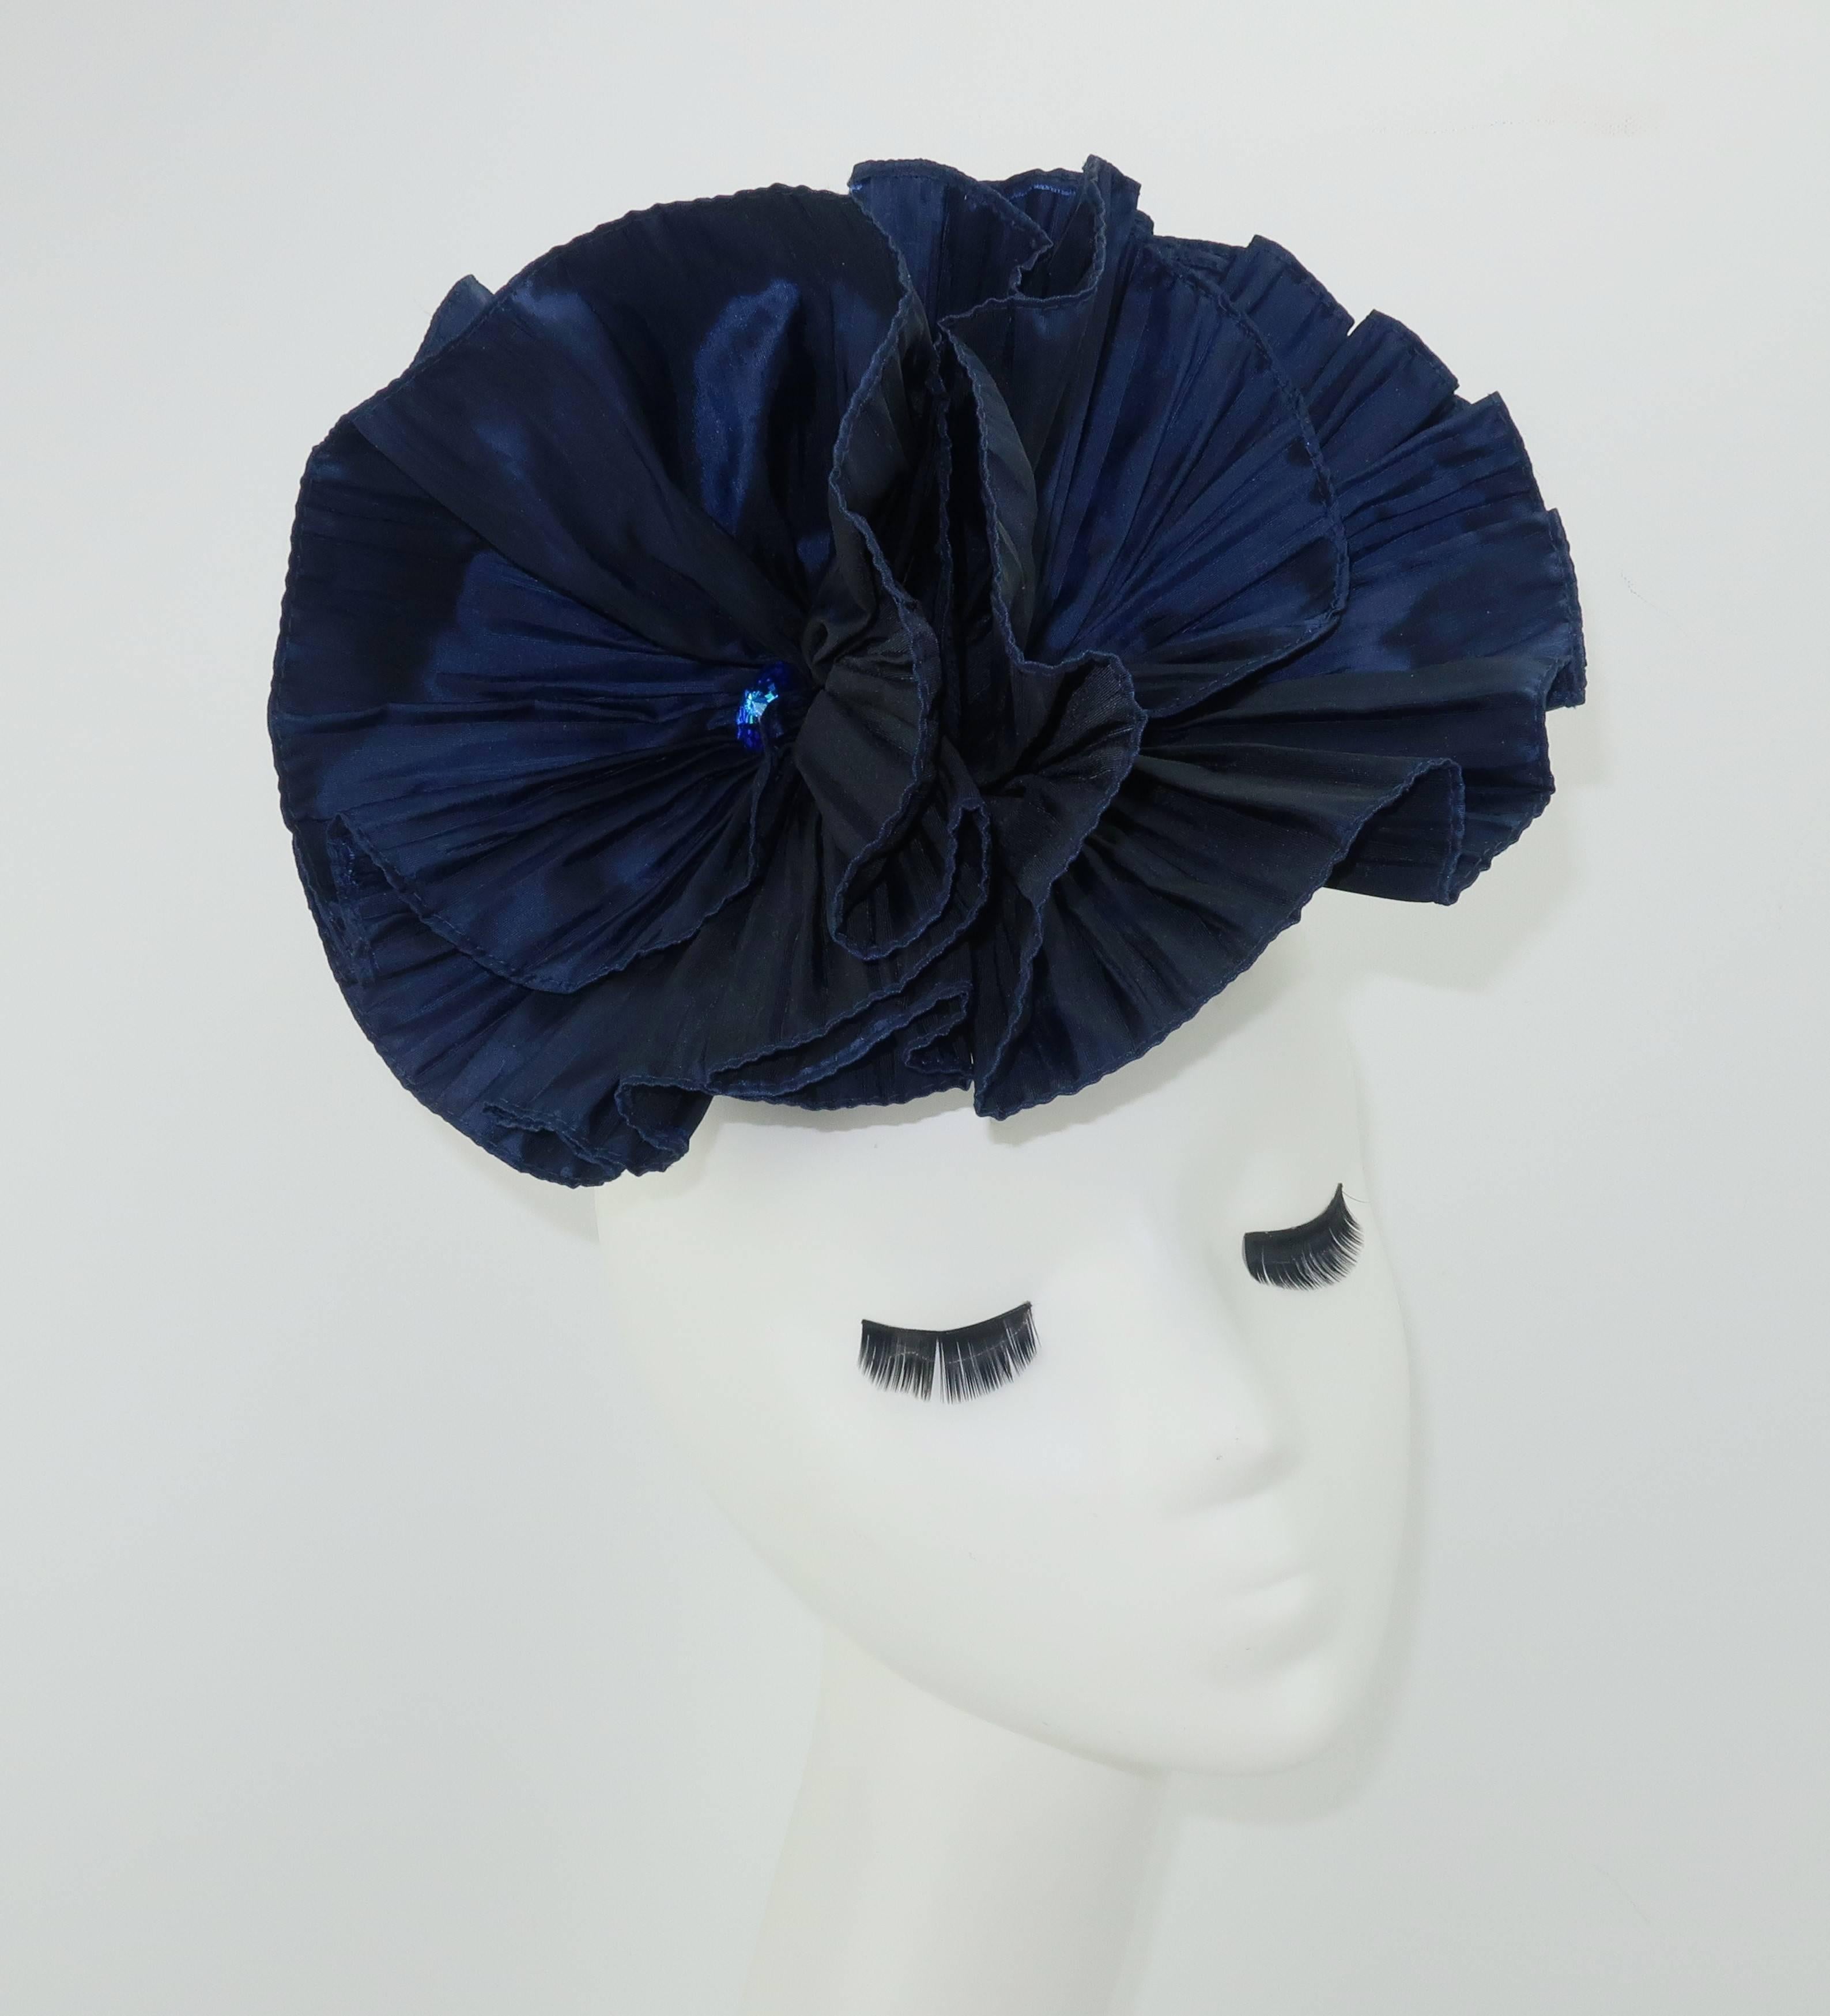 Royal wedding anyone?  Fascinators have a well earned place in the fashion history of millinery design.  The word itself means to bewitch and indeed this 1980’s version does it quite well in blue micro pleated taffeta.  The fabric is shaped into two